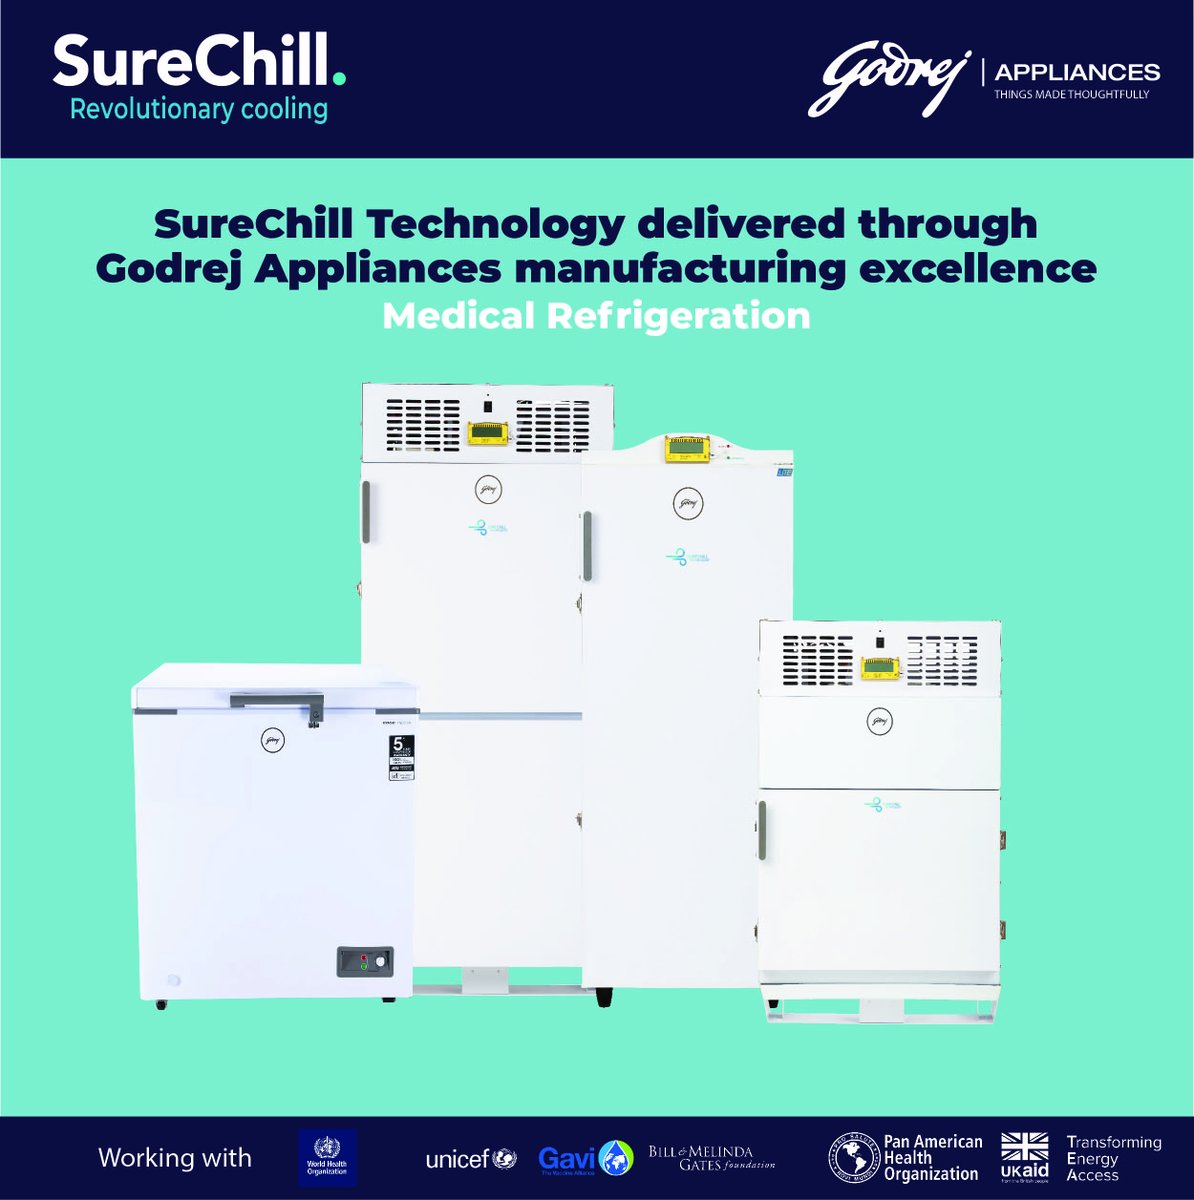 In 2 weeks, SureChill and @GodrejAppliance will be participating at the 17th #TechNet Conference in #Panama City: Immunization Programs That Leave No One Behind. Come to see how we are helping to strengthen Ministries of Health #Cold Chains and some of our new cooling solutions.